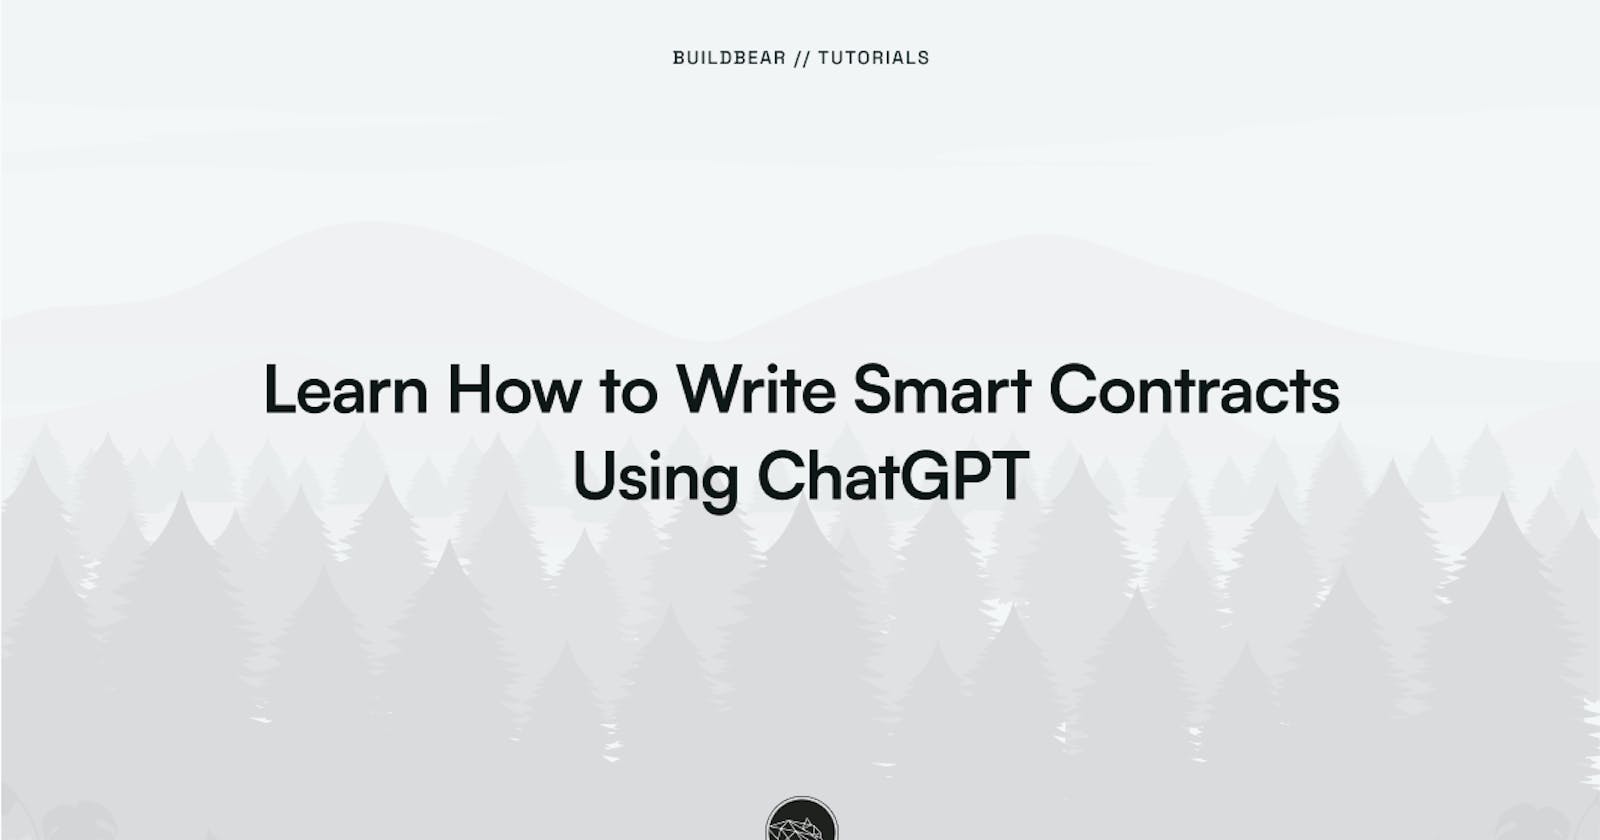 Learn How to Write Smart Contracts Using ChatGPT